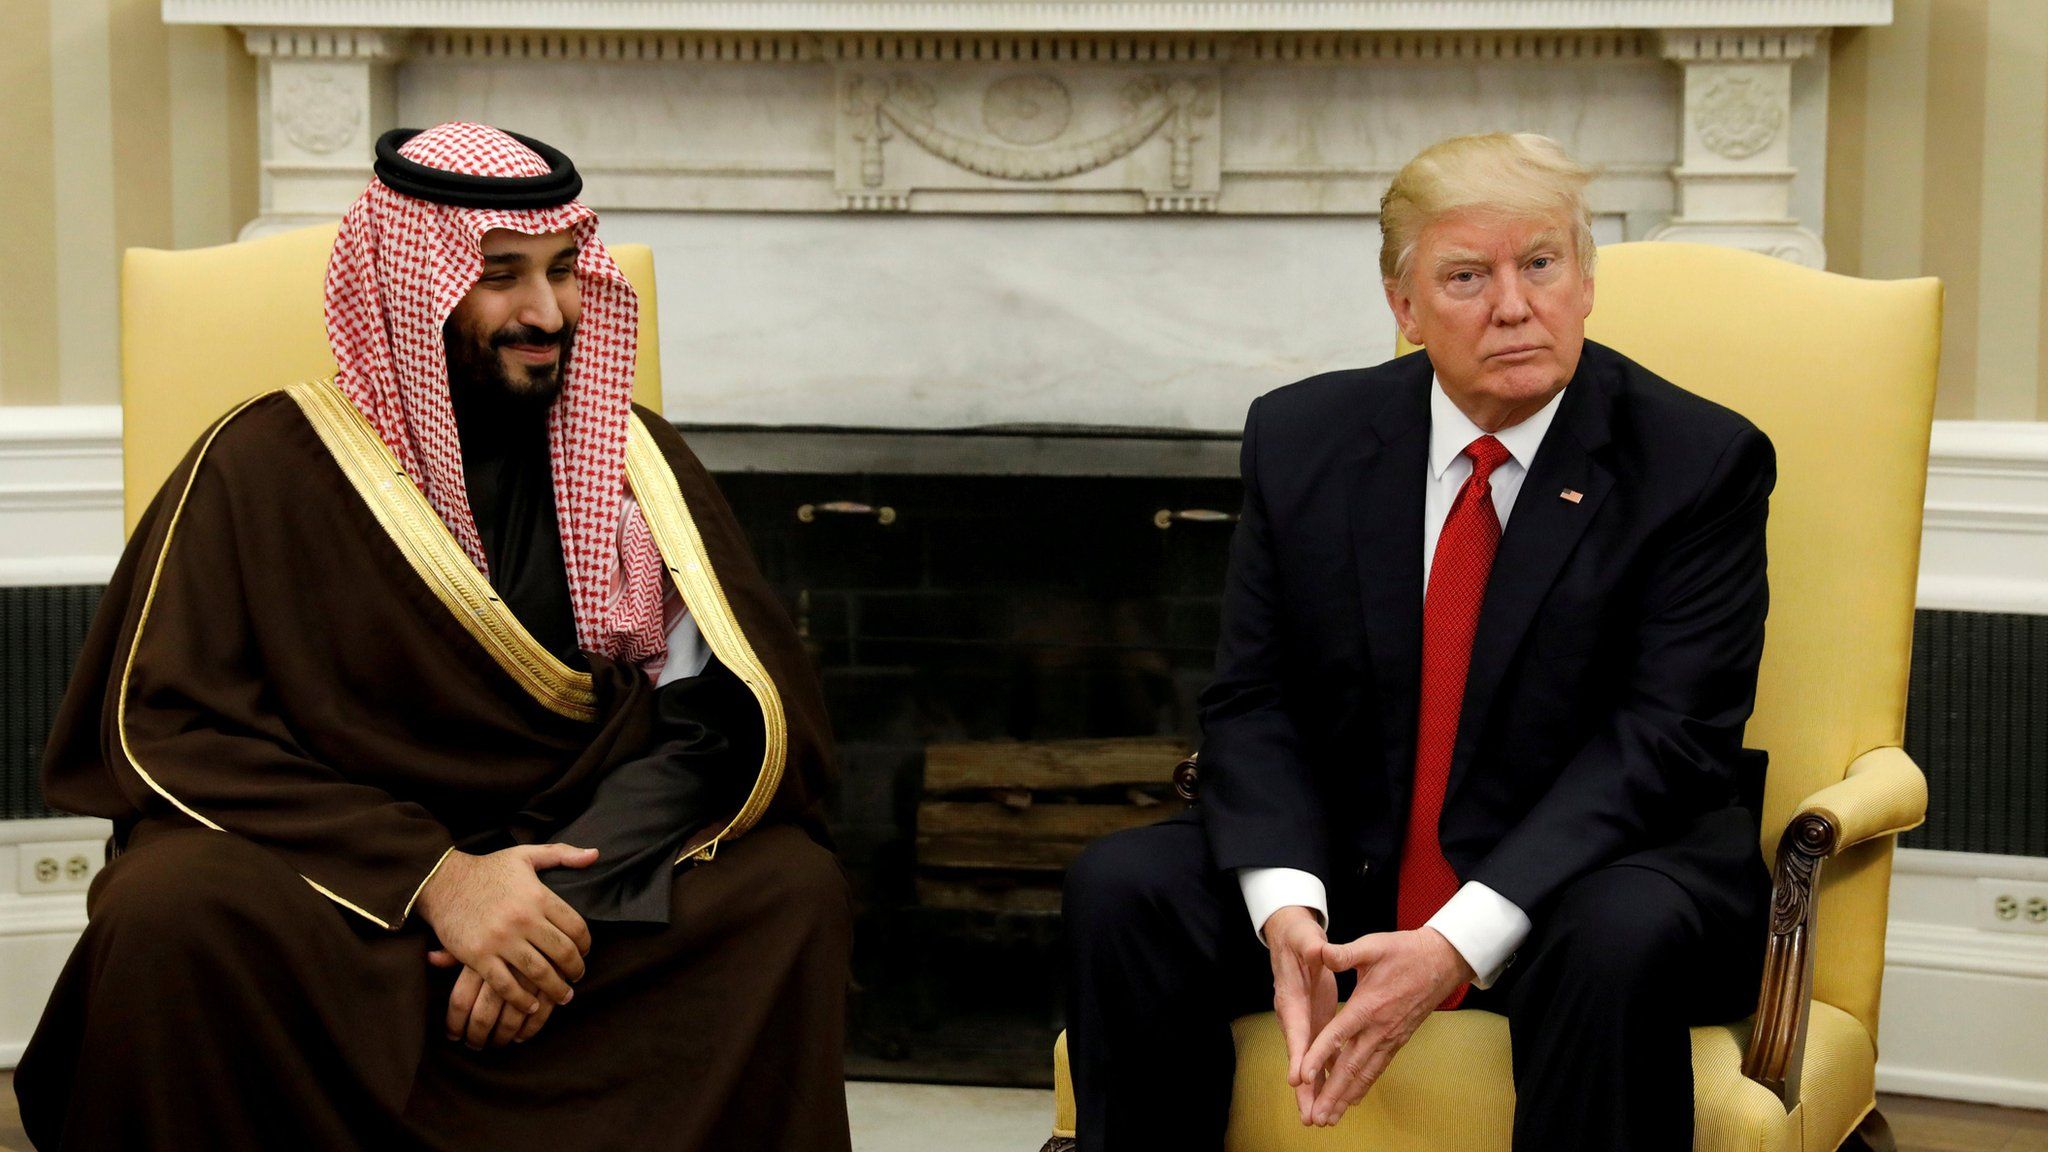 Saudi Prince Mohammed Bin Salman sits next to US President Donald Trump at the White House on 14 March 2017